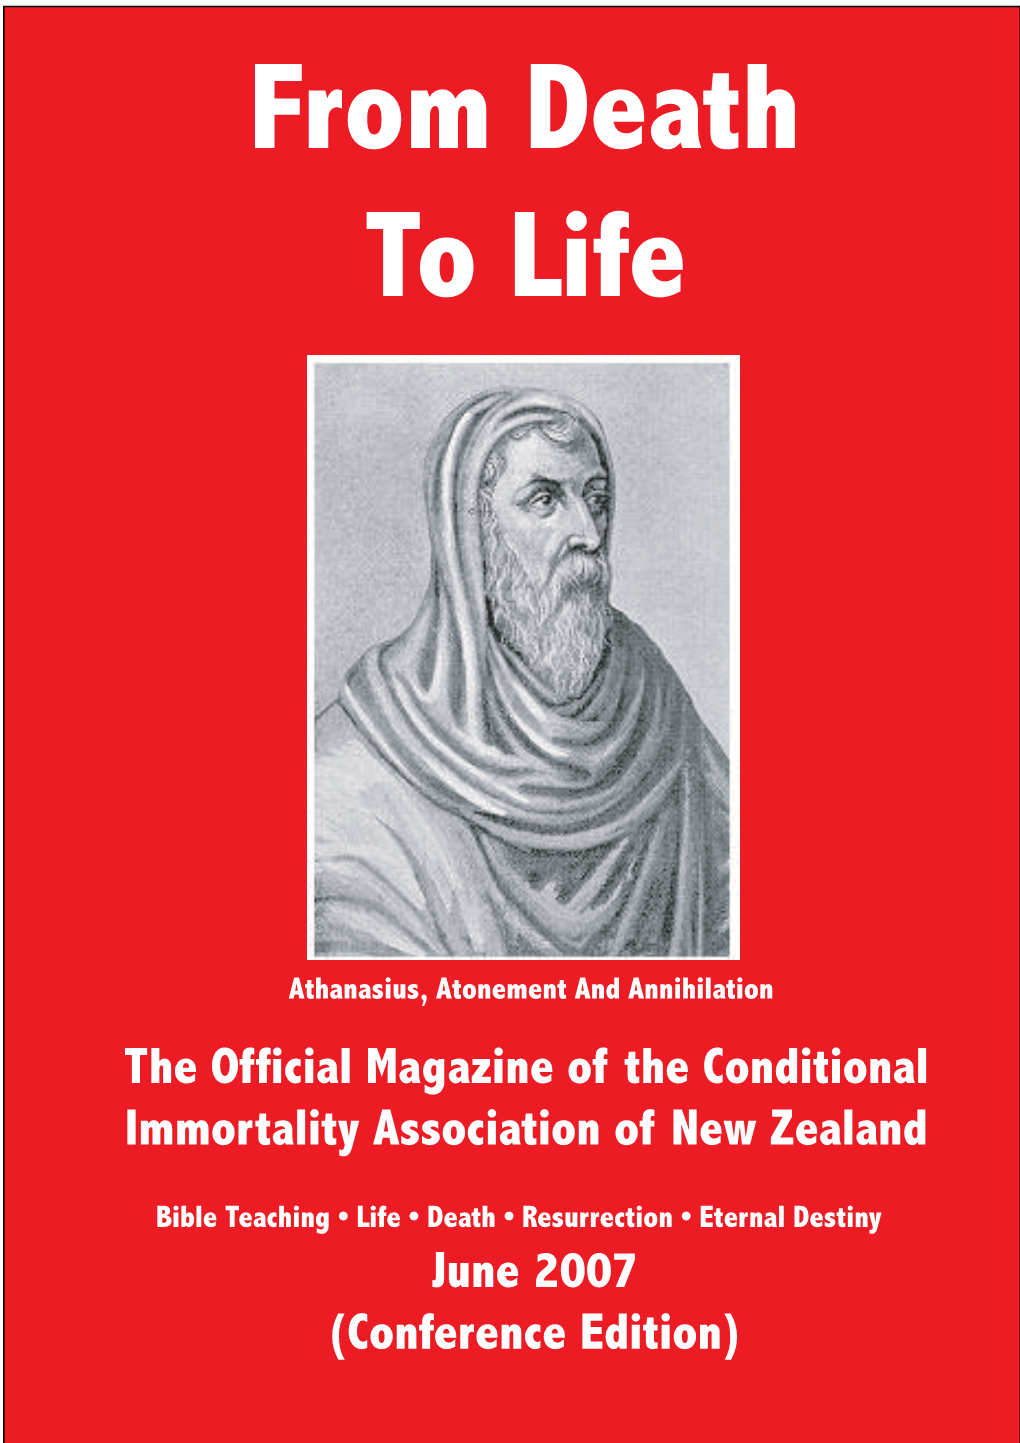 The Official Magazine of the Conditional Immortality Association of New Zealand